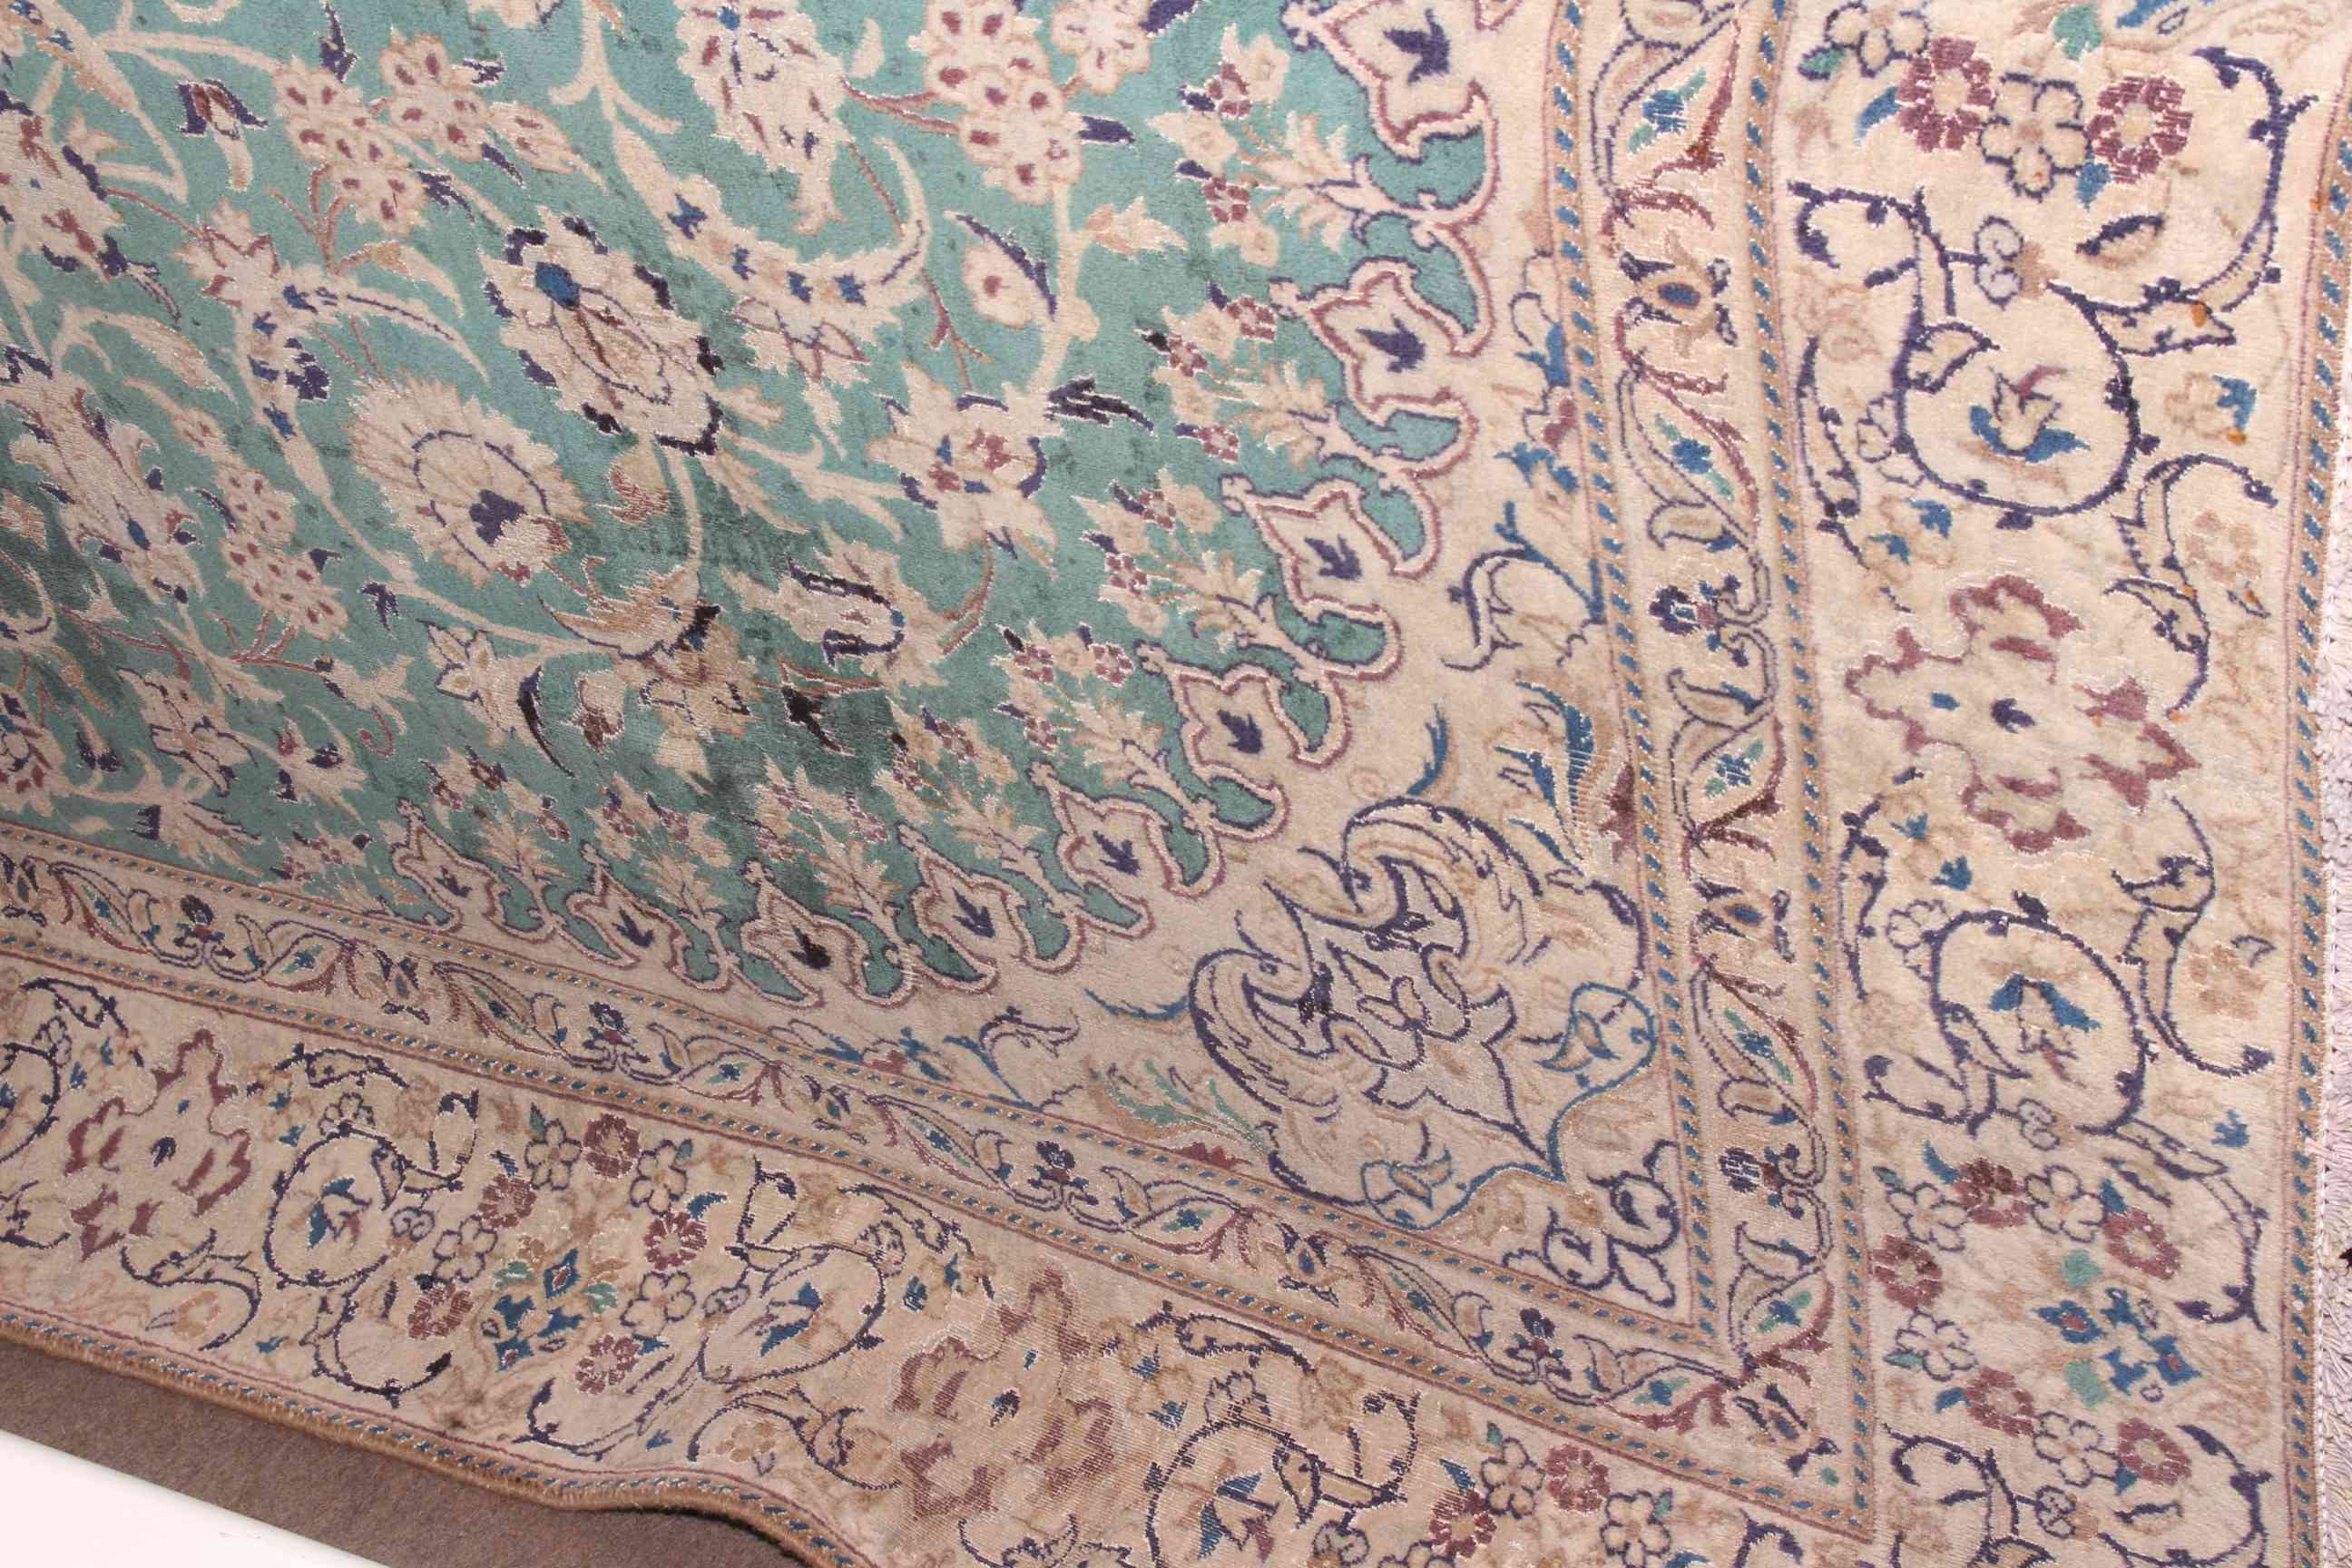 Fine hand made green ground Iranian carpet from the Naeen region 325 by 220cm. - Image 2 of 2